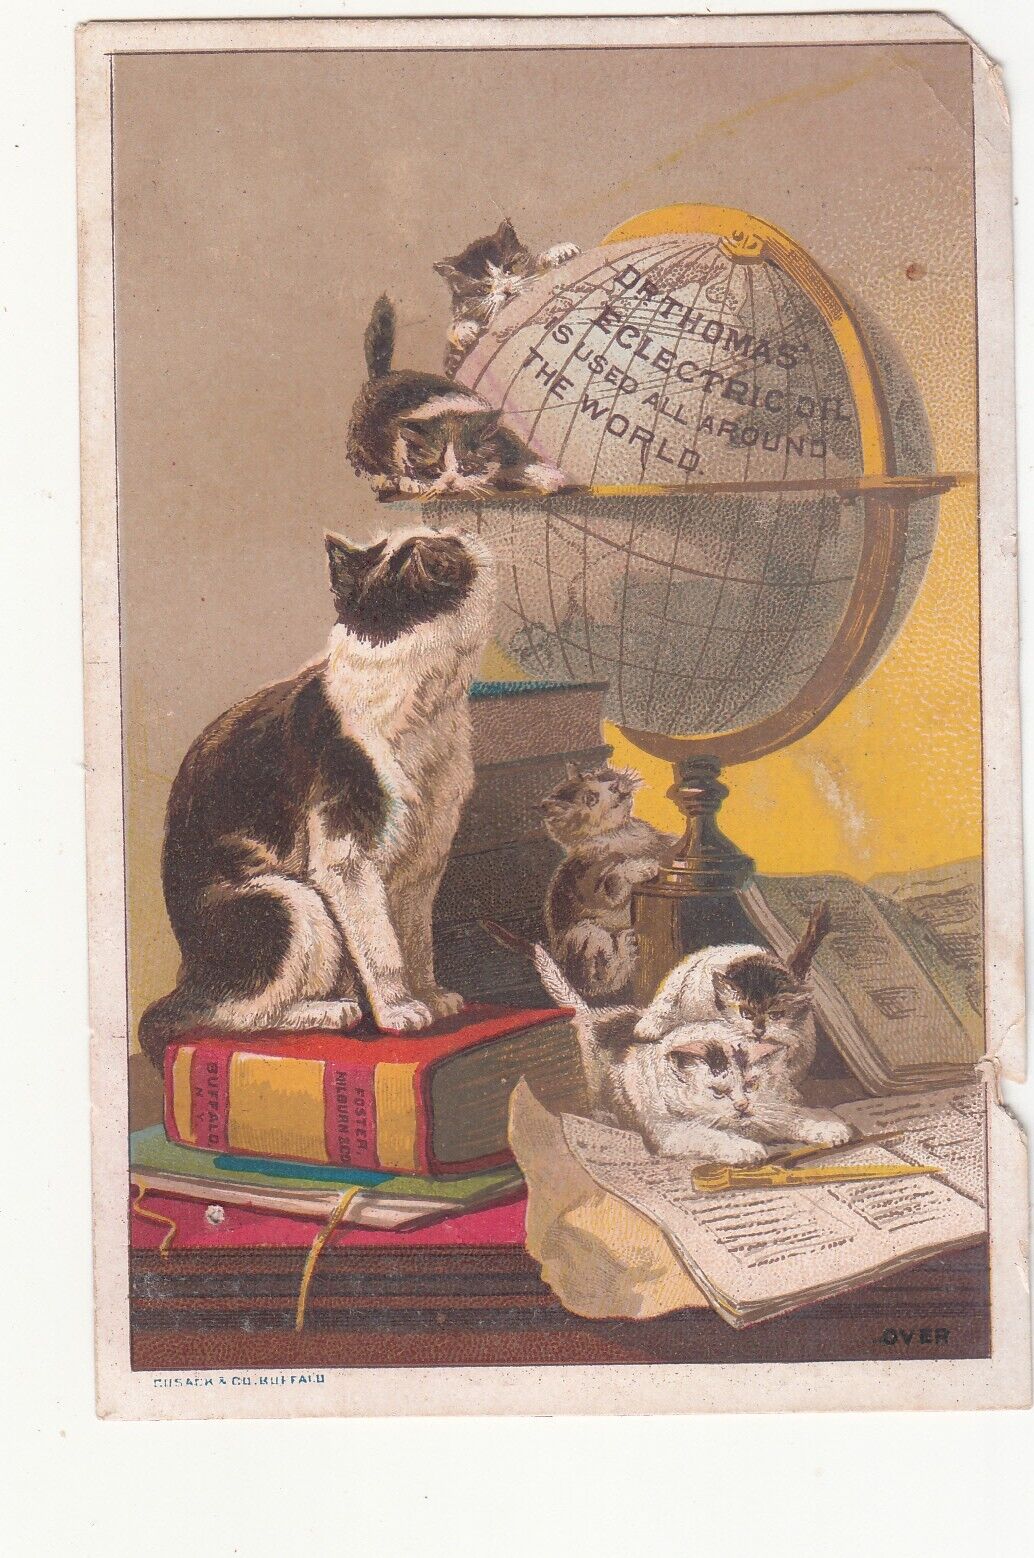 Dr Thomas Eclectric Oil Globe Cats J C Altick Shippensburg PA Vict Card c1880